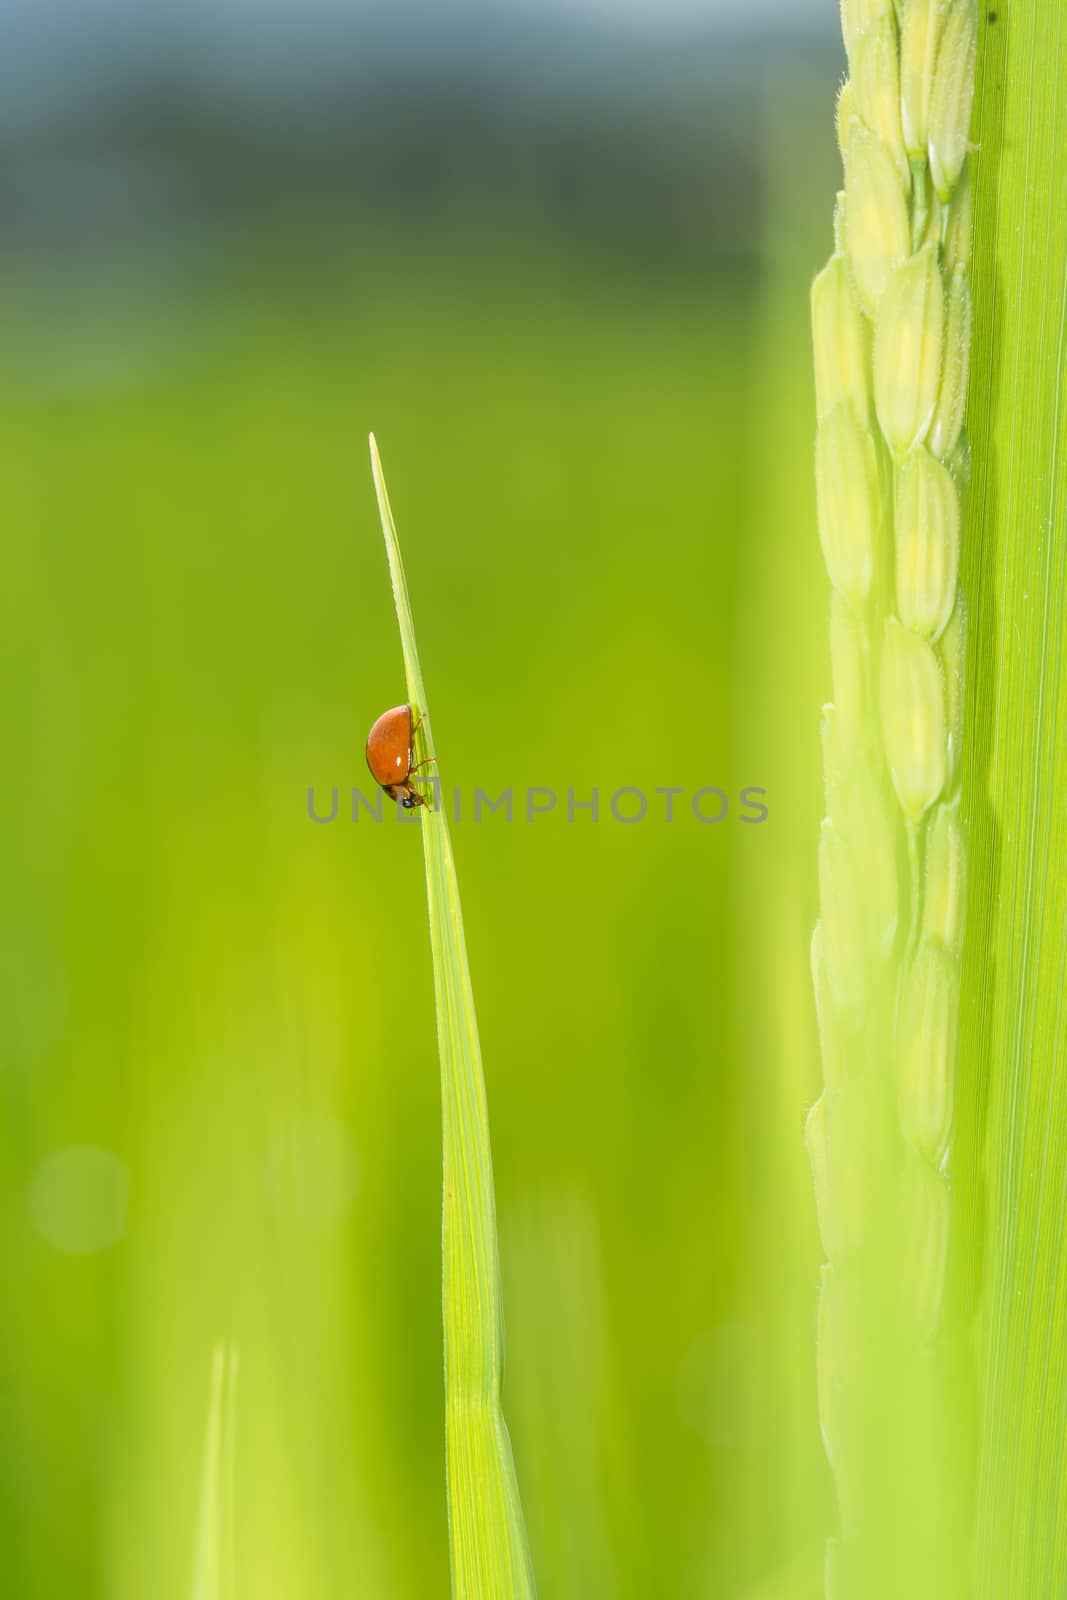 red lady bug by faa069913827